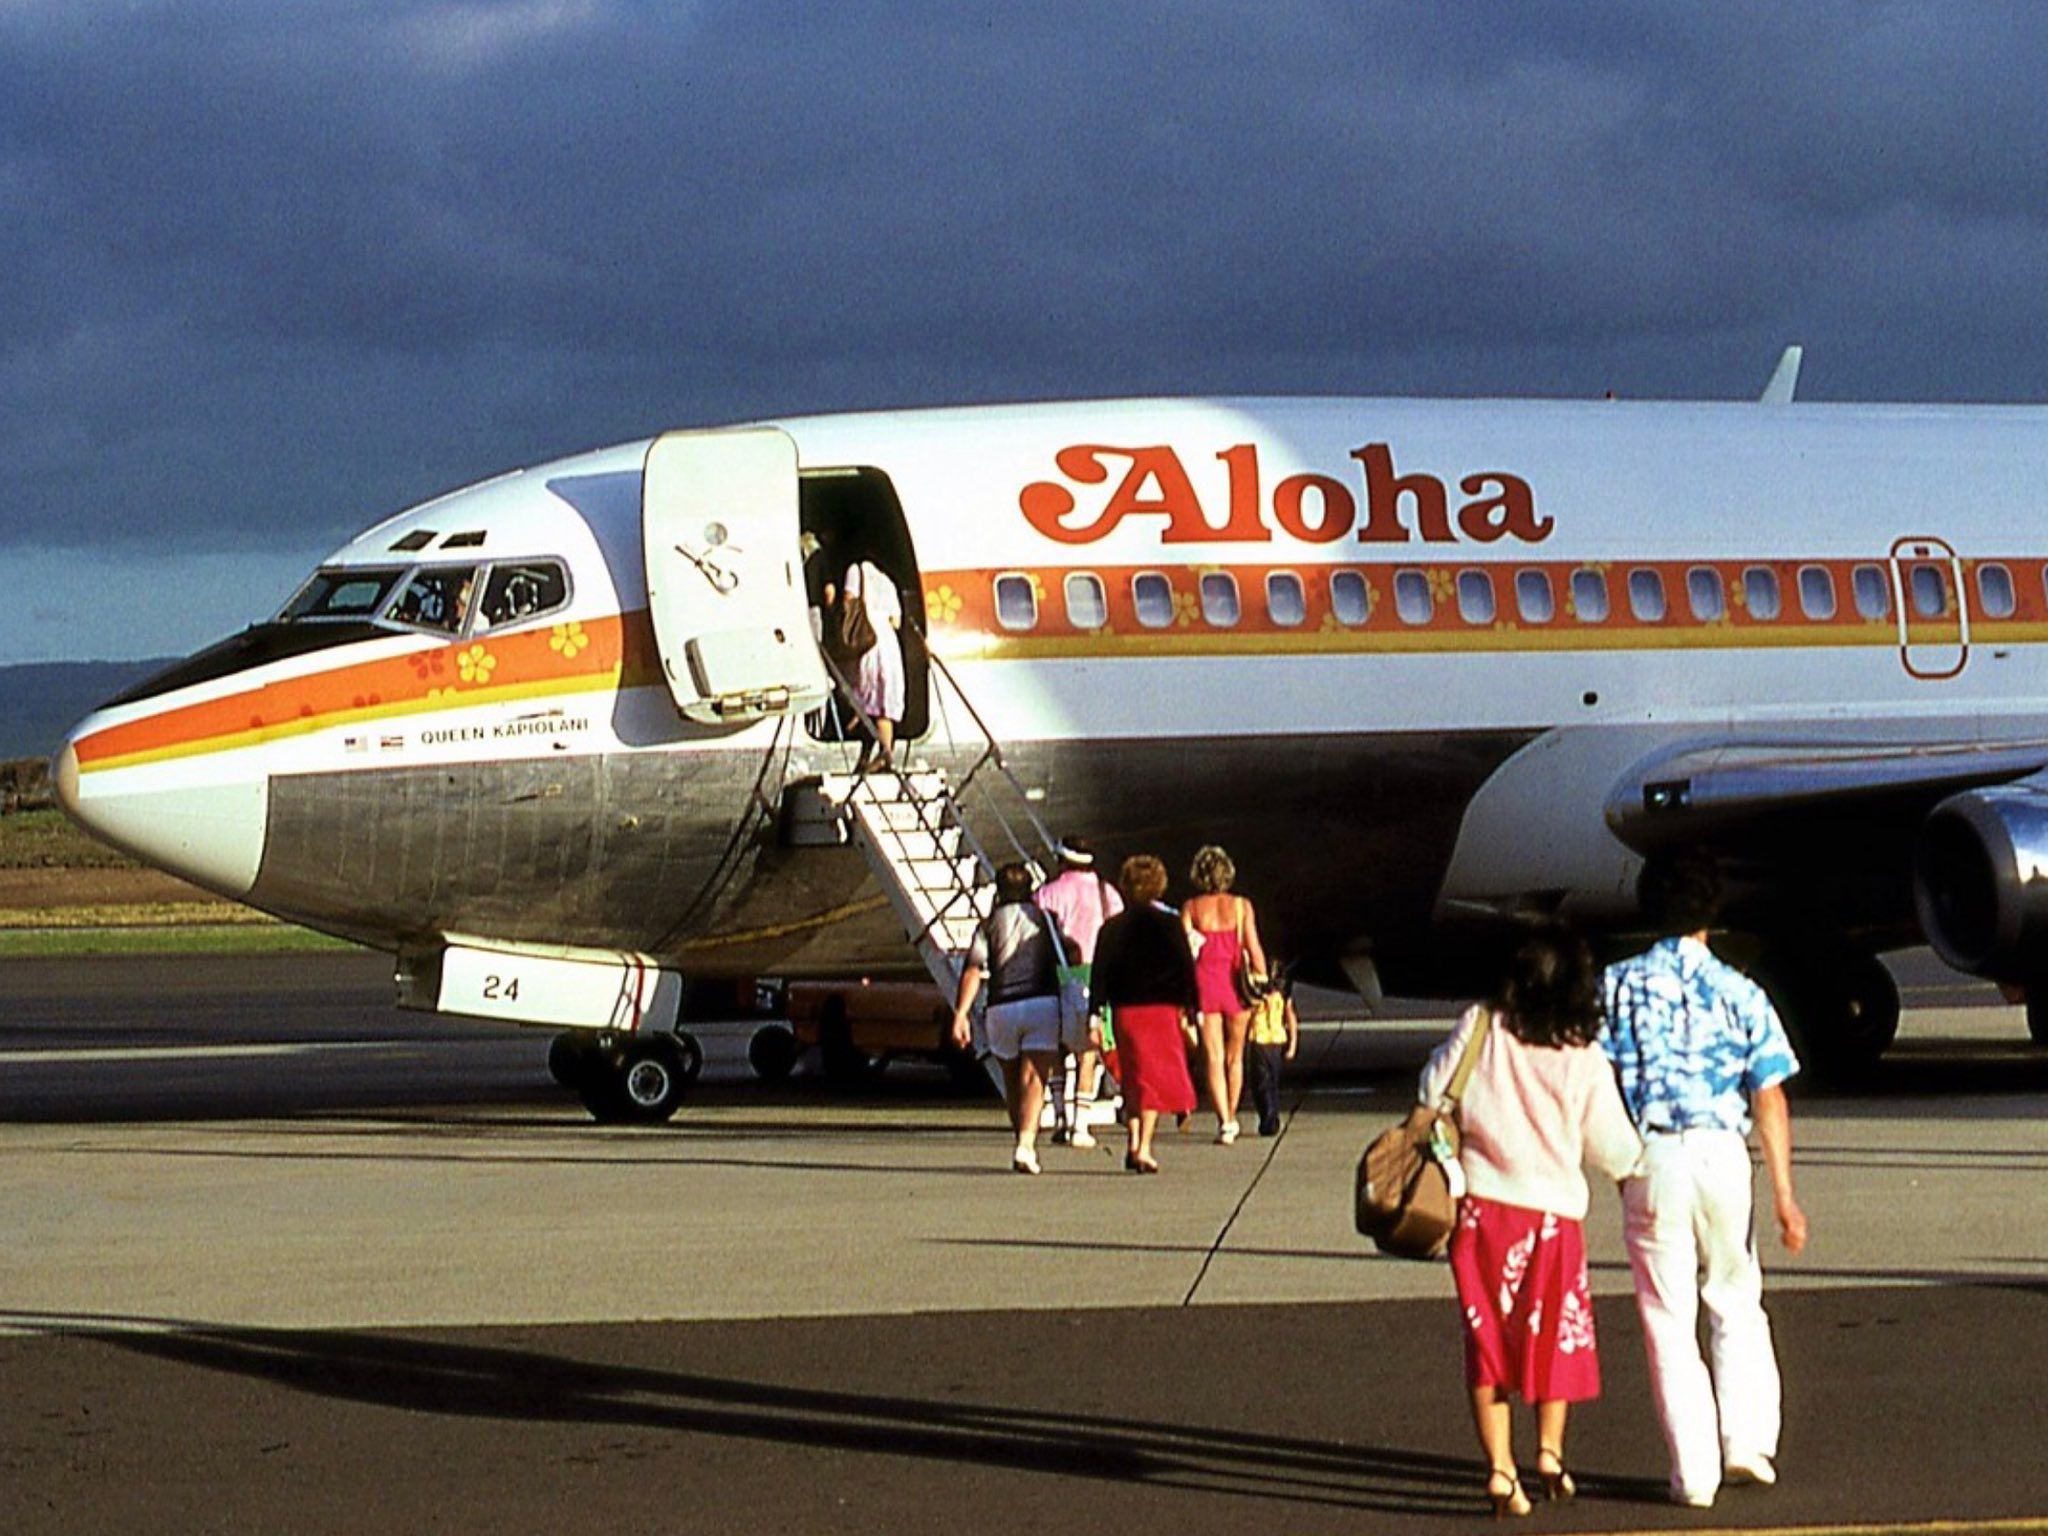 Several passengers boarding an Aloha Airlines aircraft from the airport apron.